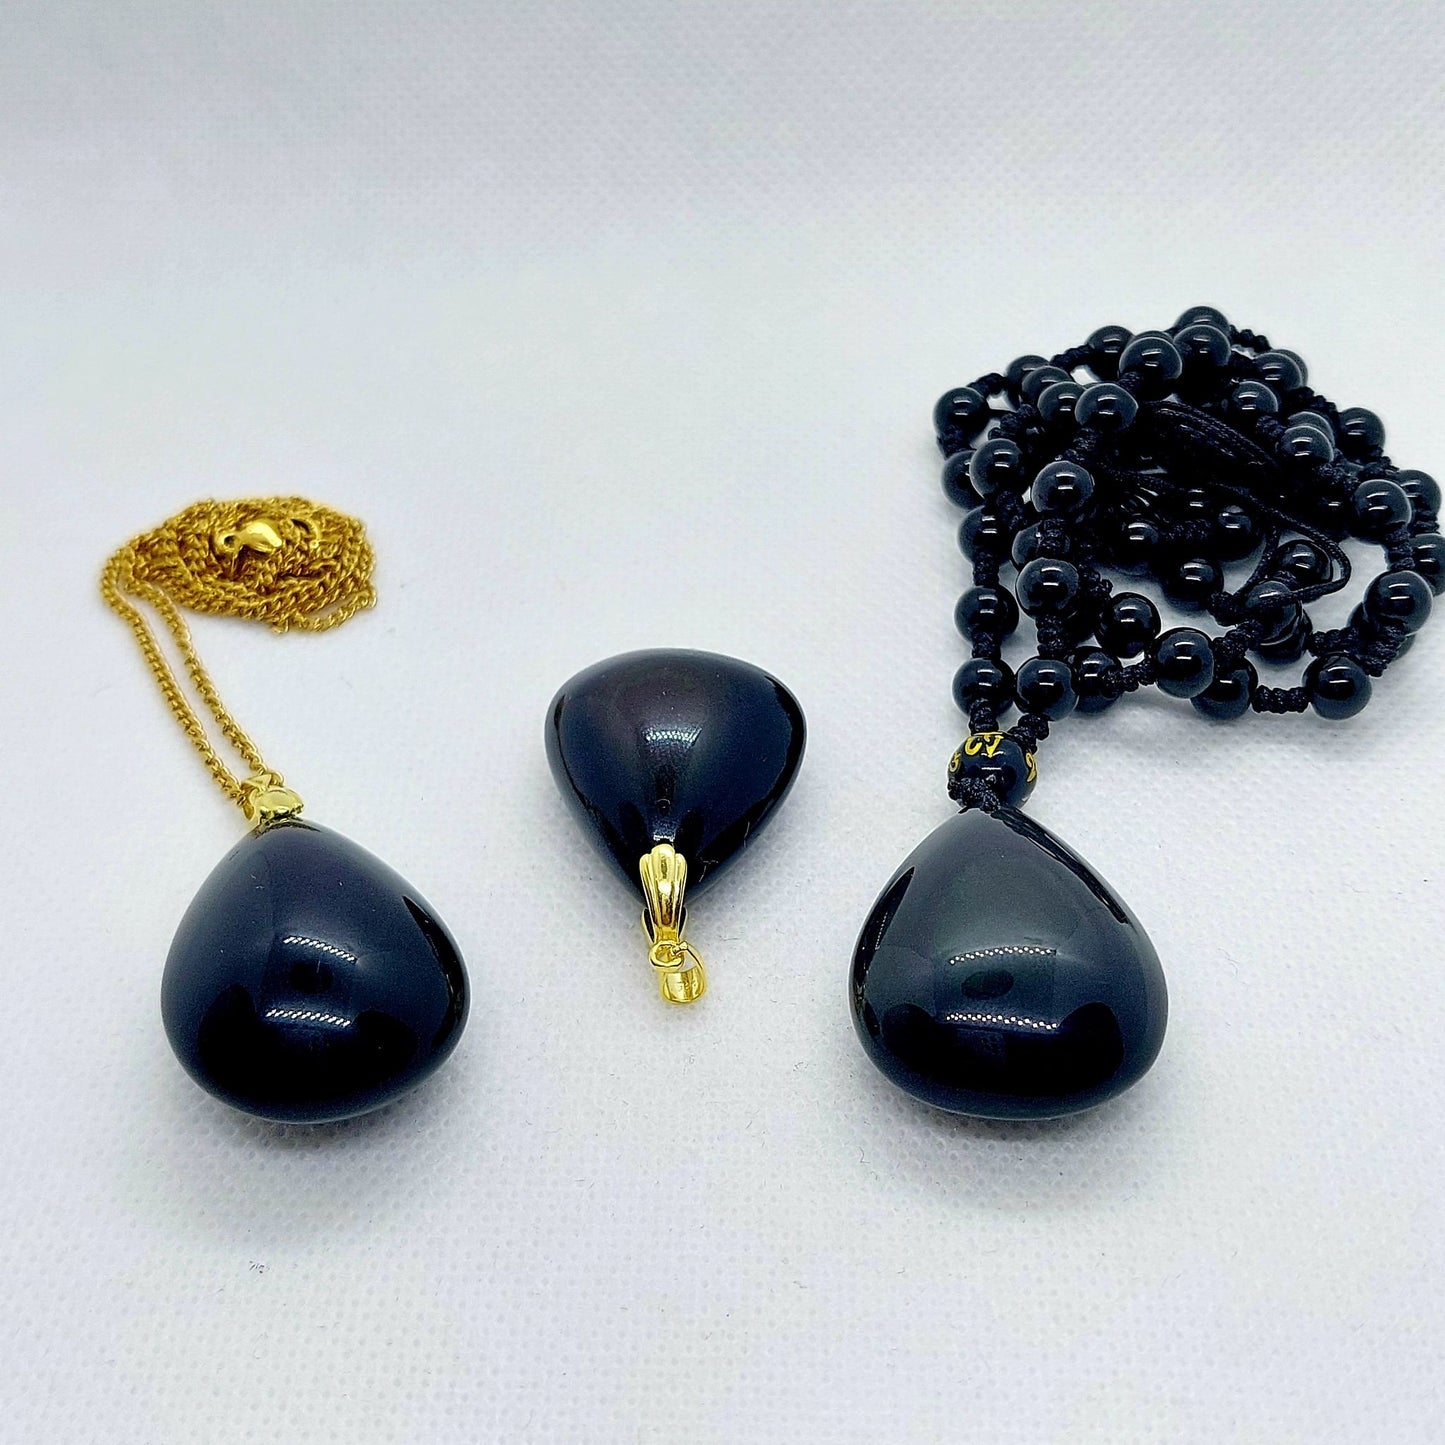 Natural Rainbow Obsidian Stone Pendant - Stainless Steel Gold Plated Chain Necklace